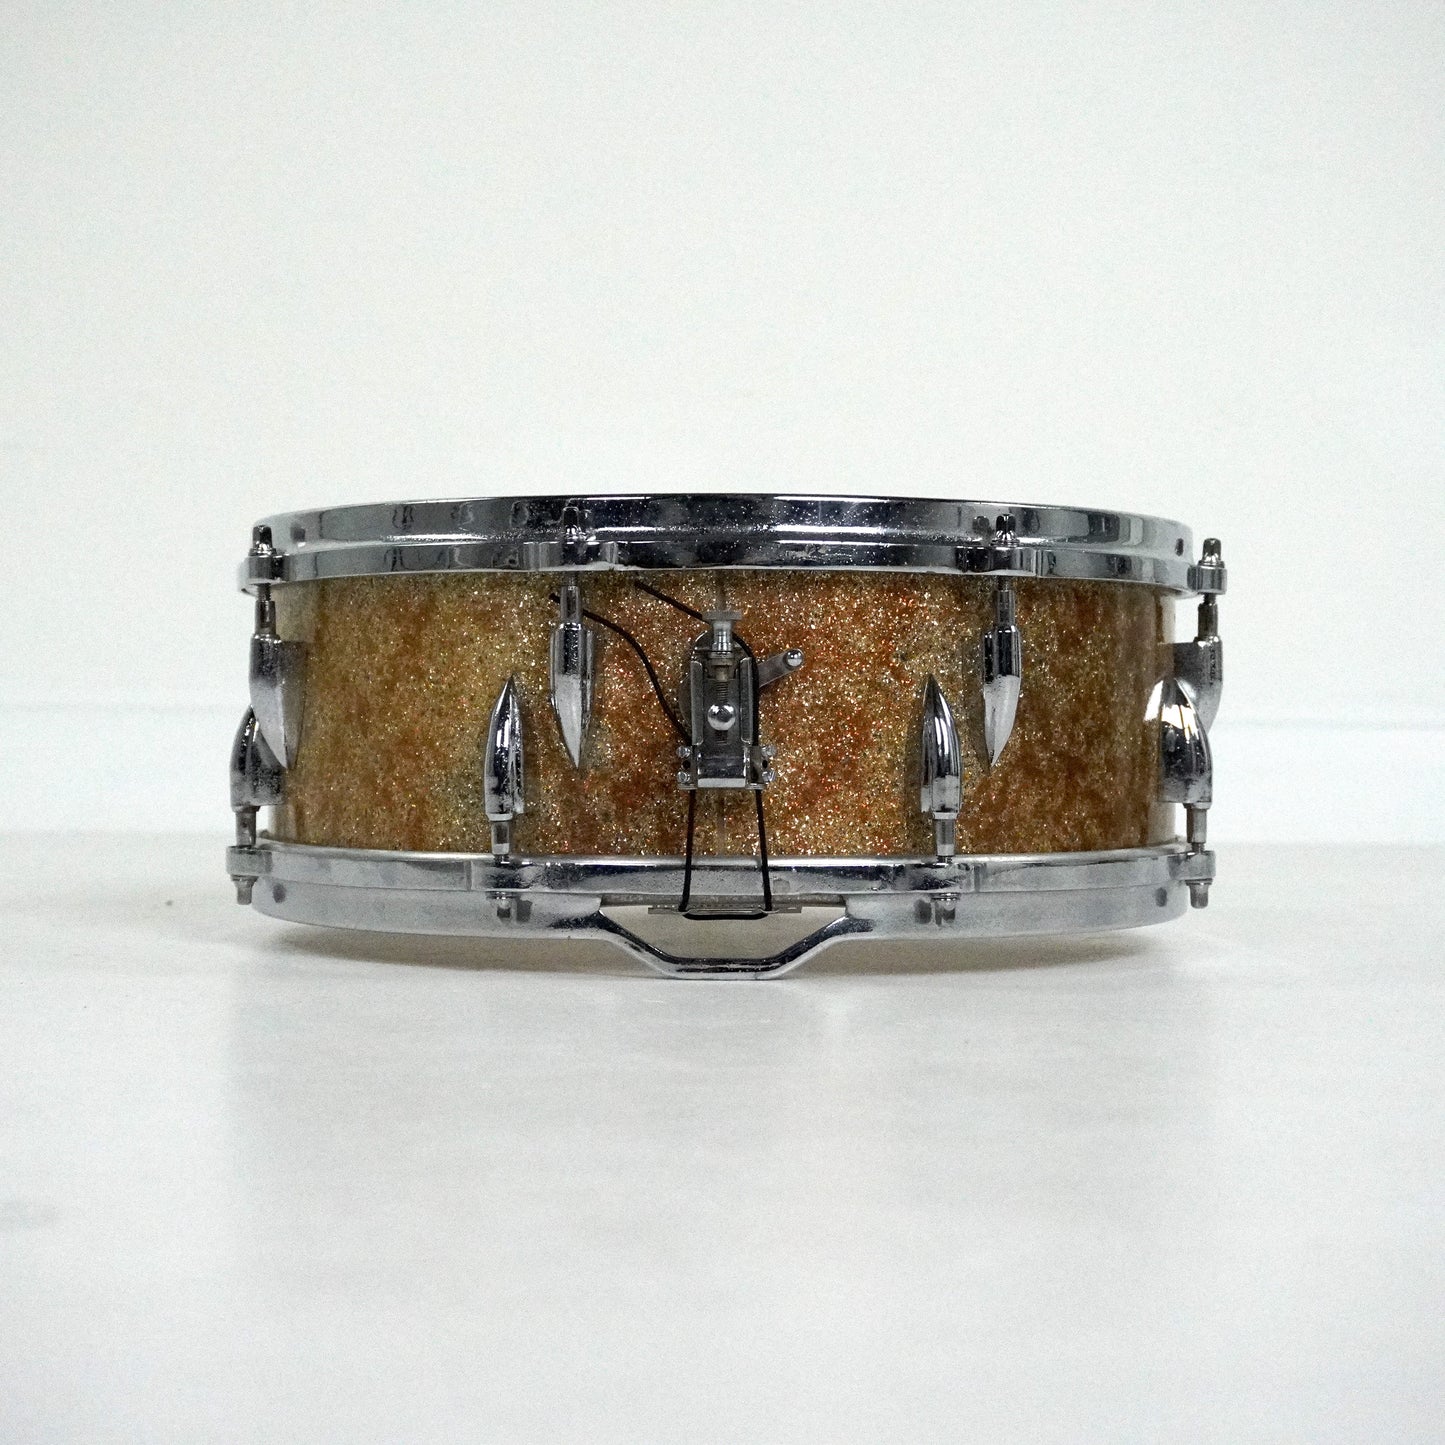 Vintage Edgware B&H 14" x 5" Snare in Gold Sparkle